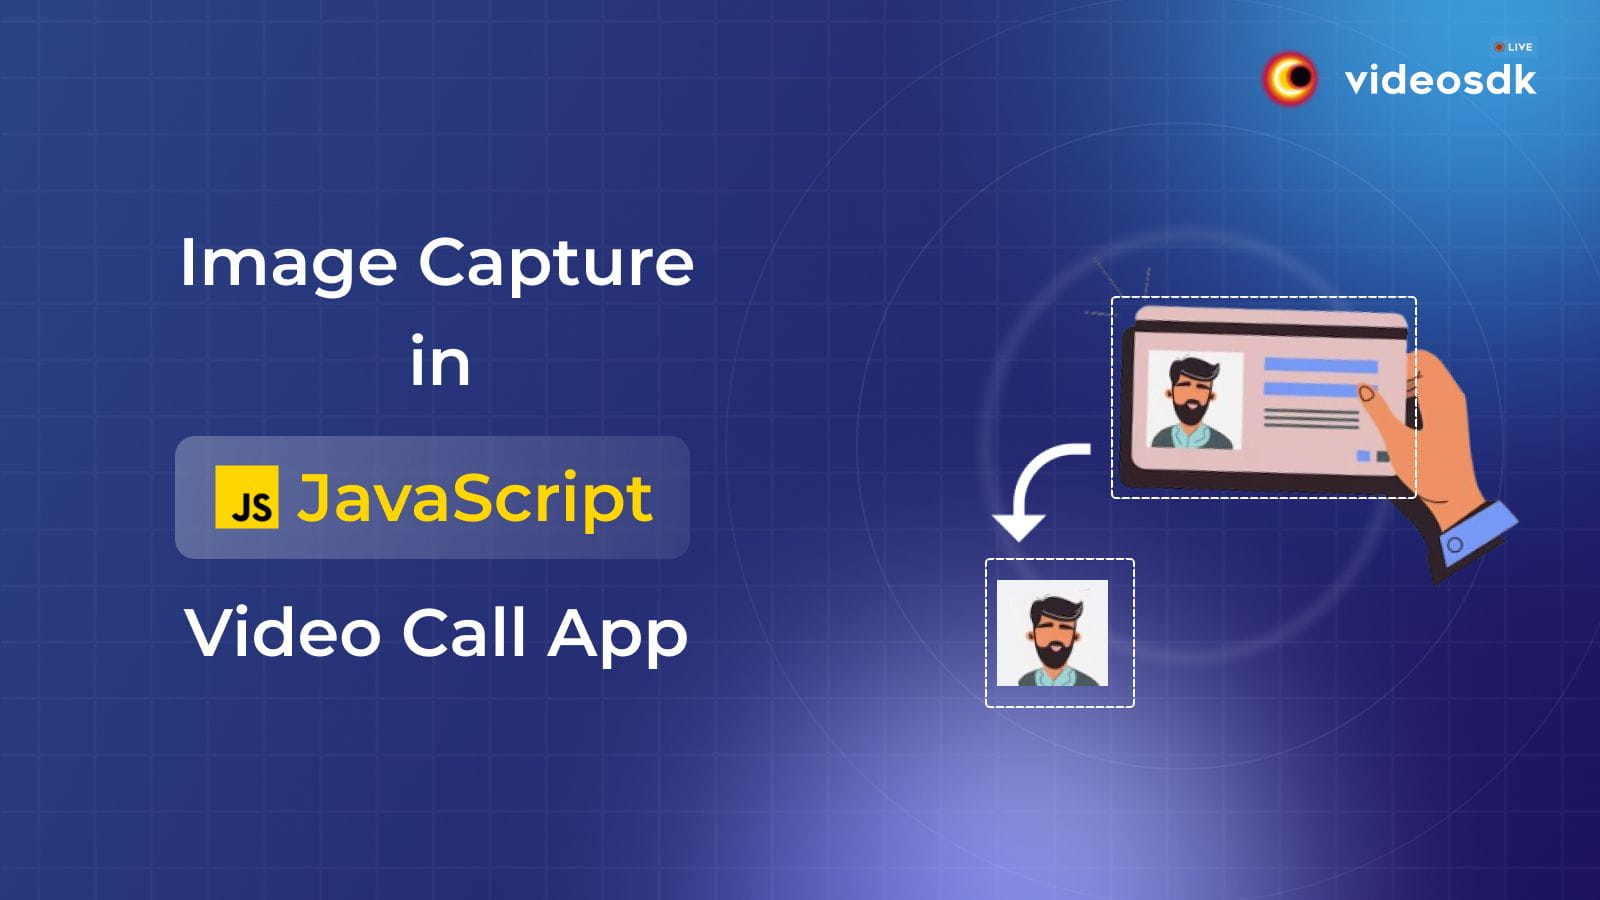 How to Integrate Image Capture in JavaScript Video Chat App?